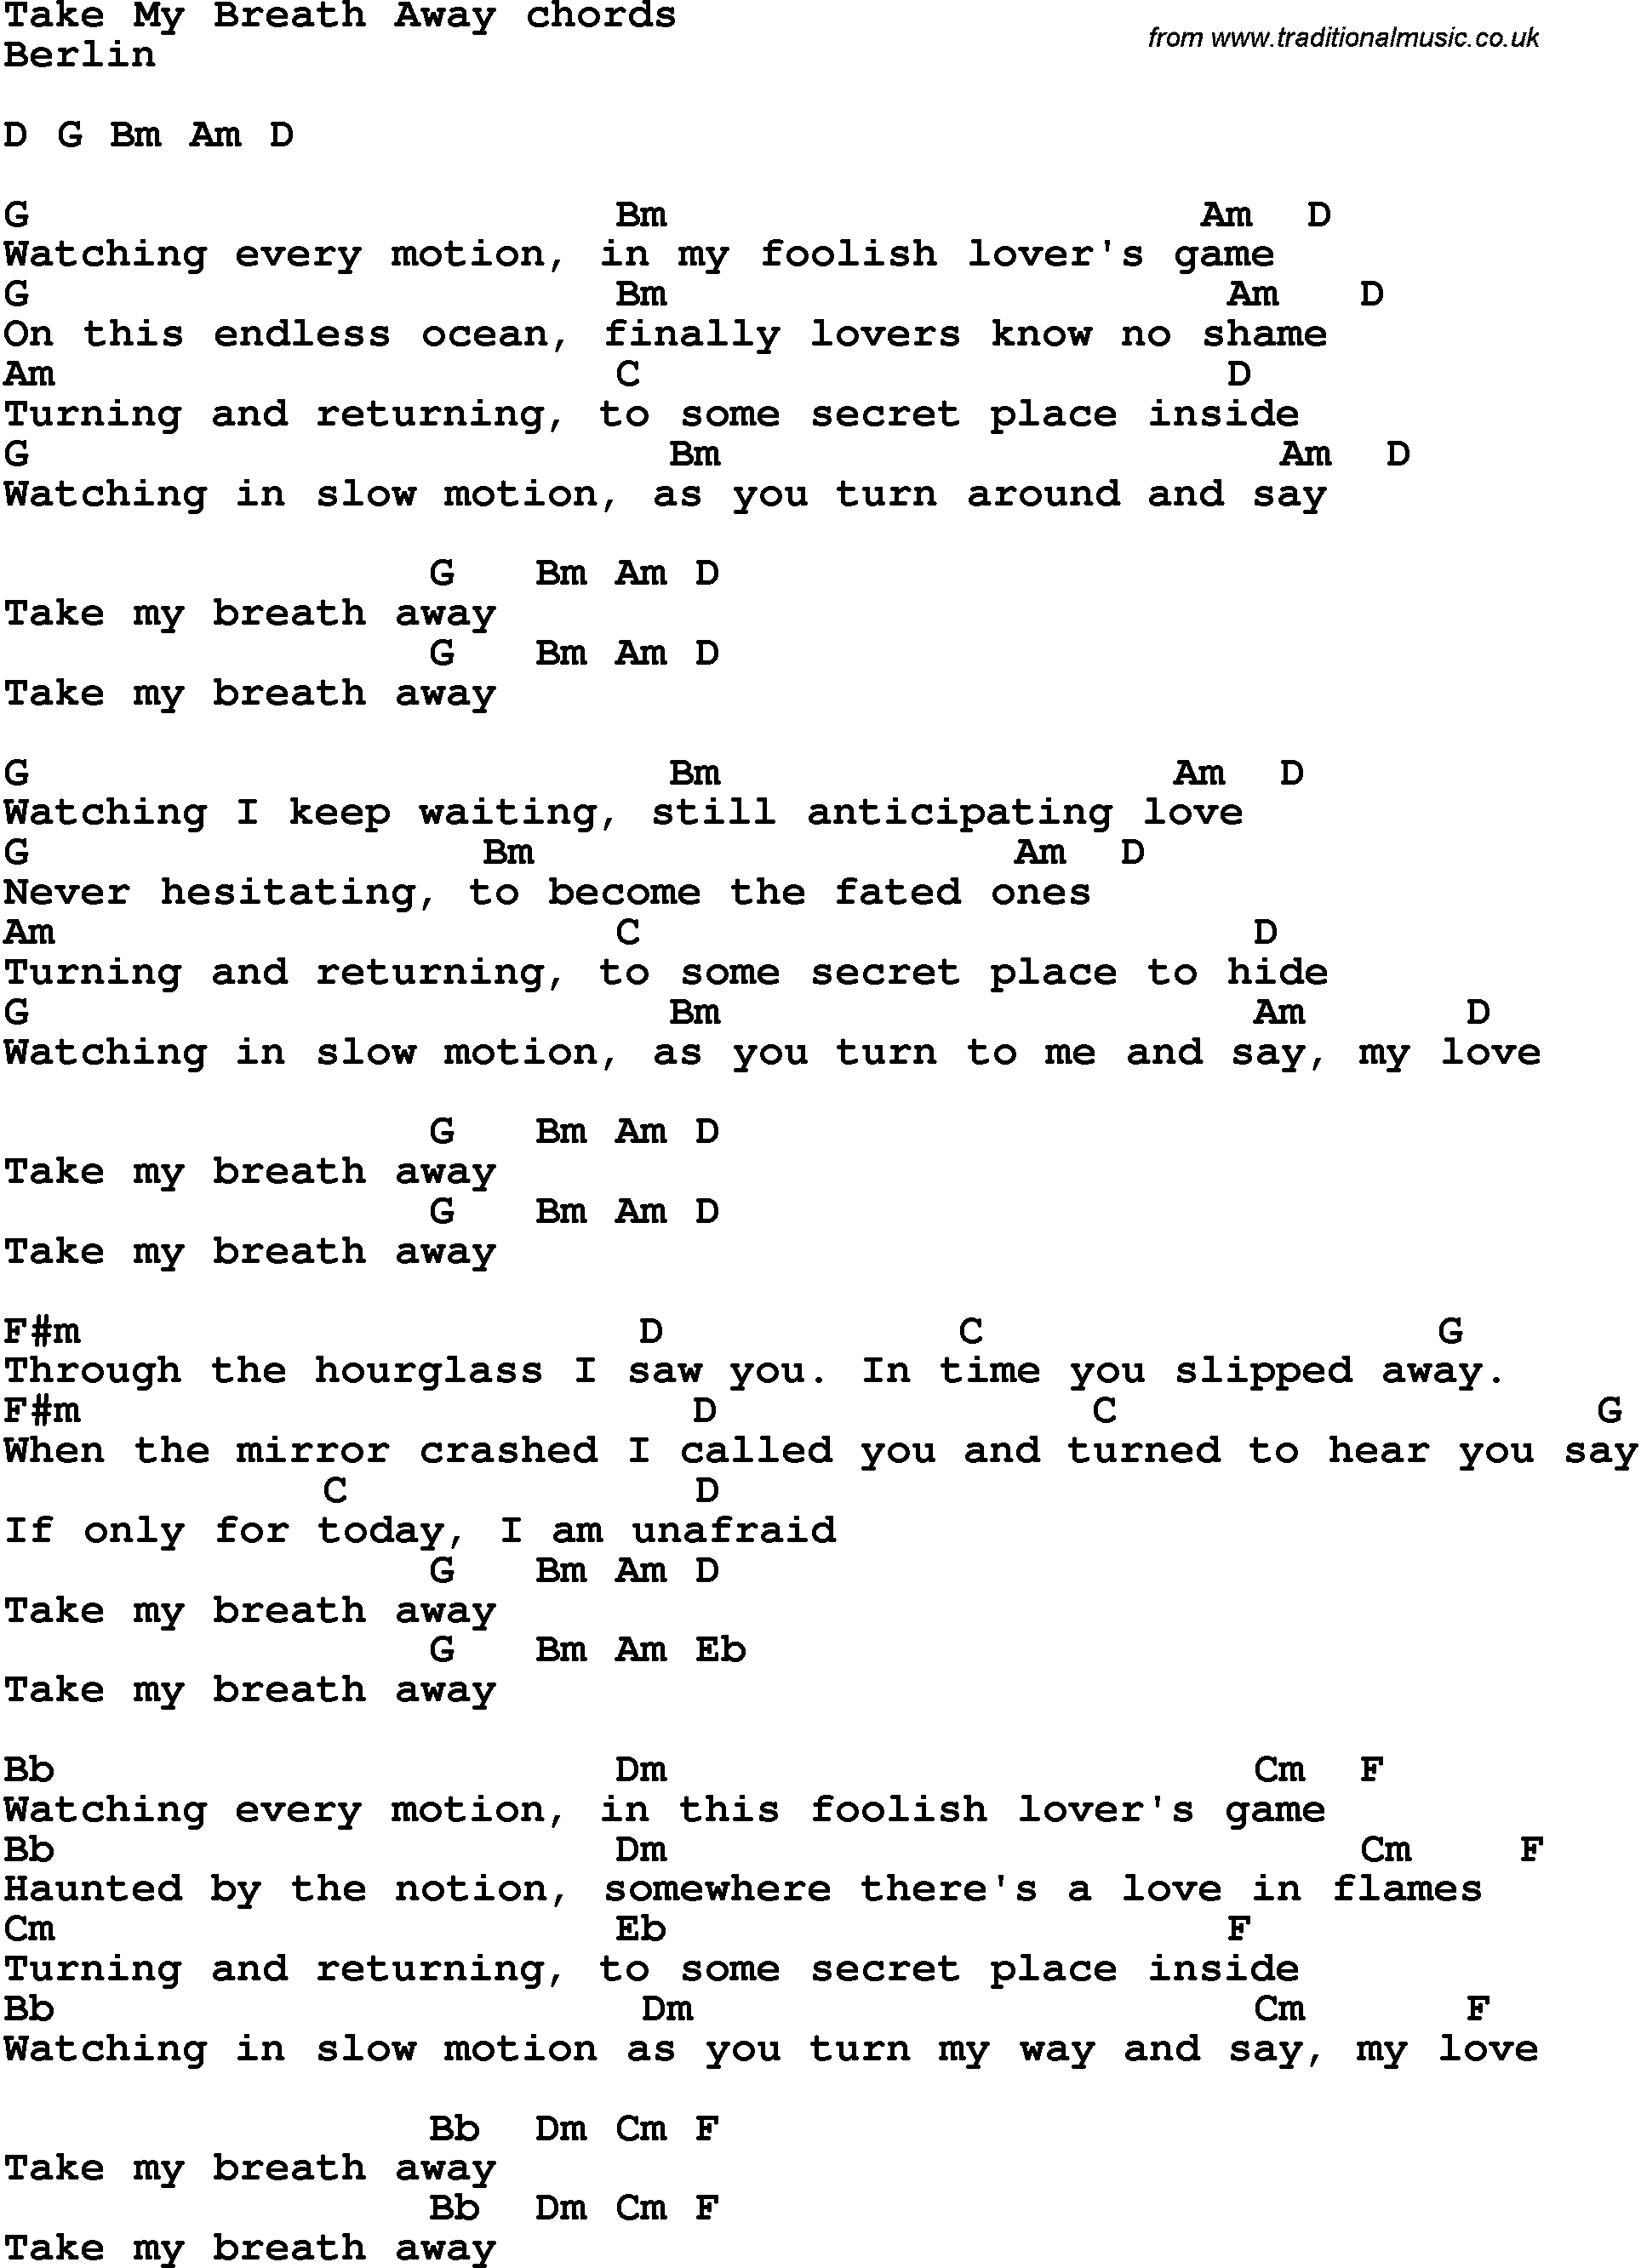 Song Lyrics with guitar chords for Take My Breath Away